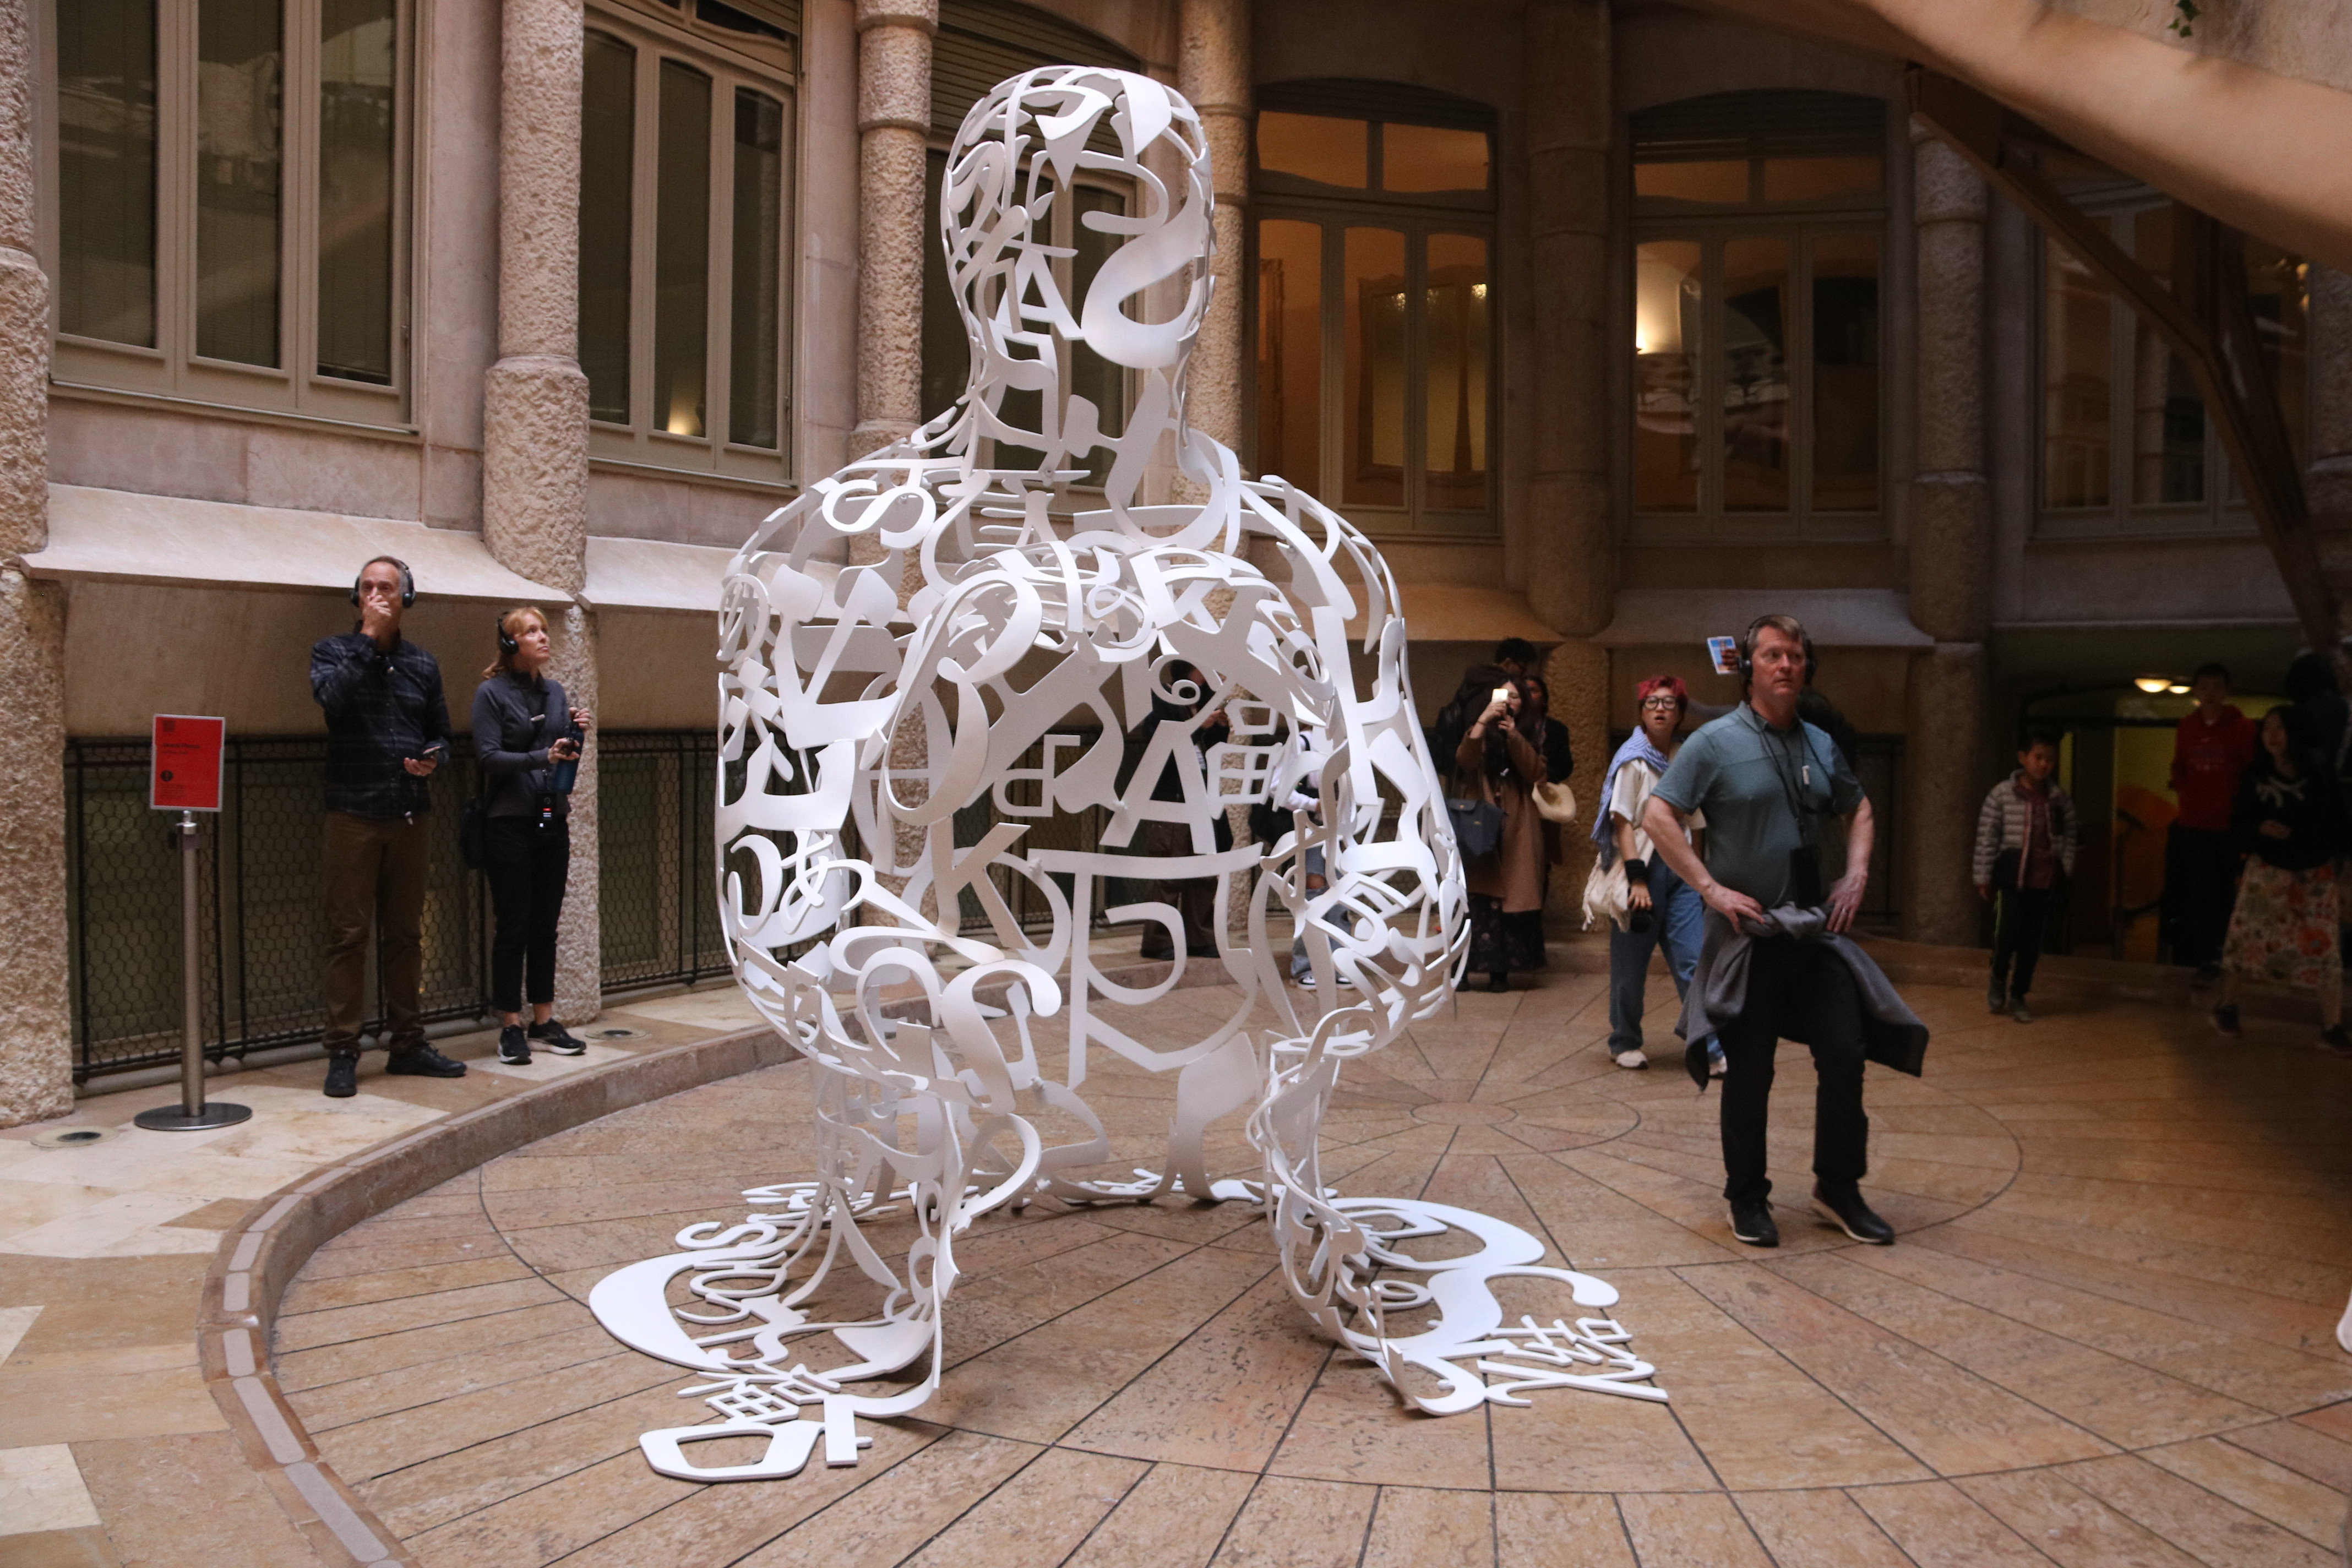 One of Jaume Plensa's statues located in one of the courtyards of Antoni Gaudí's 'La Pedrera'